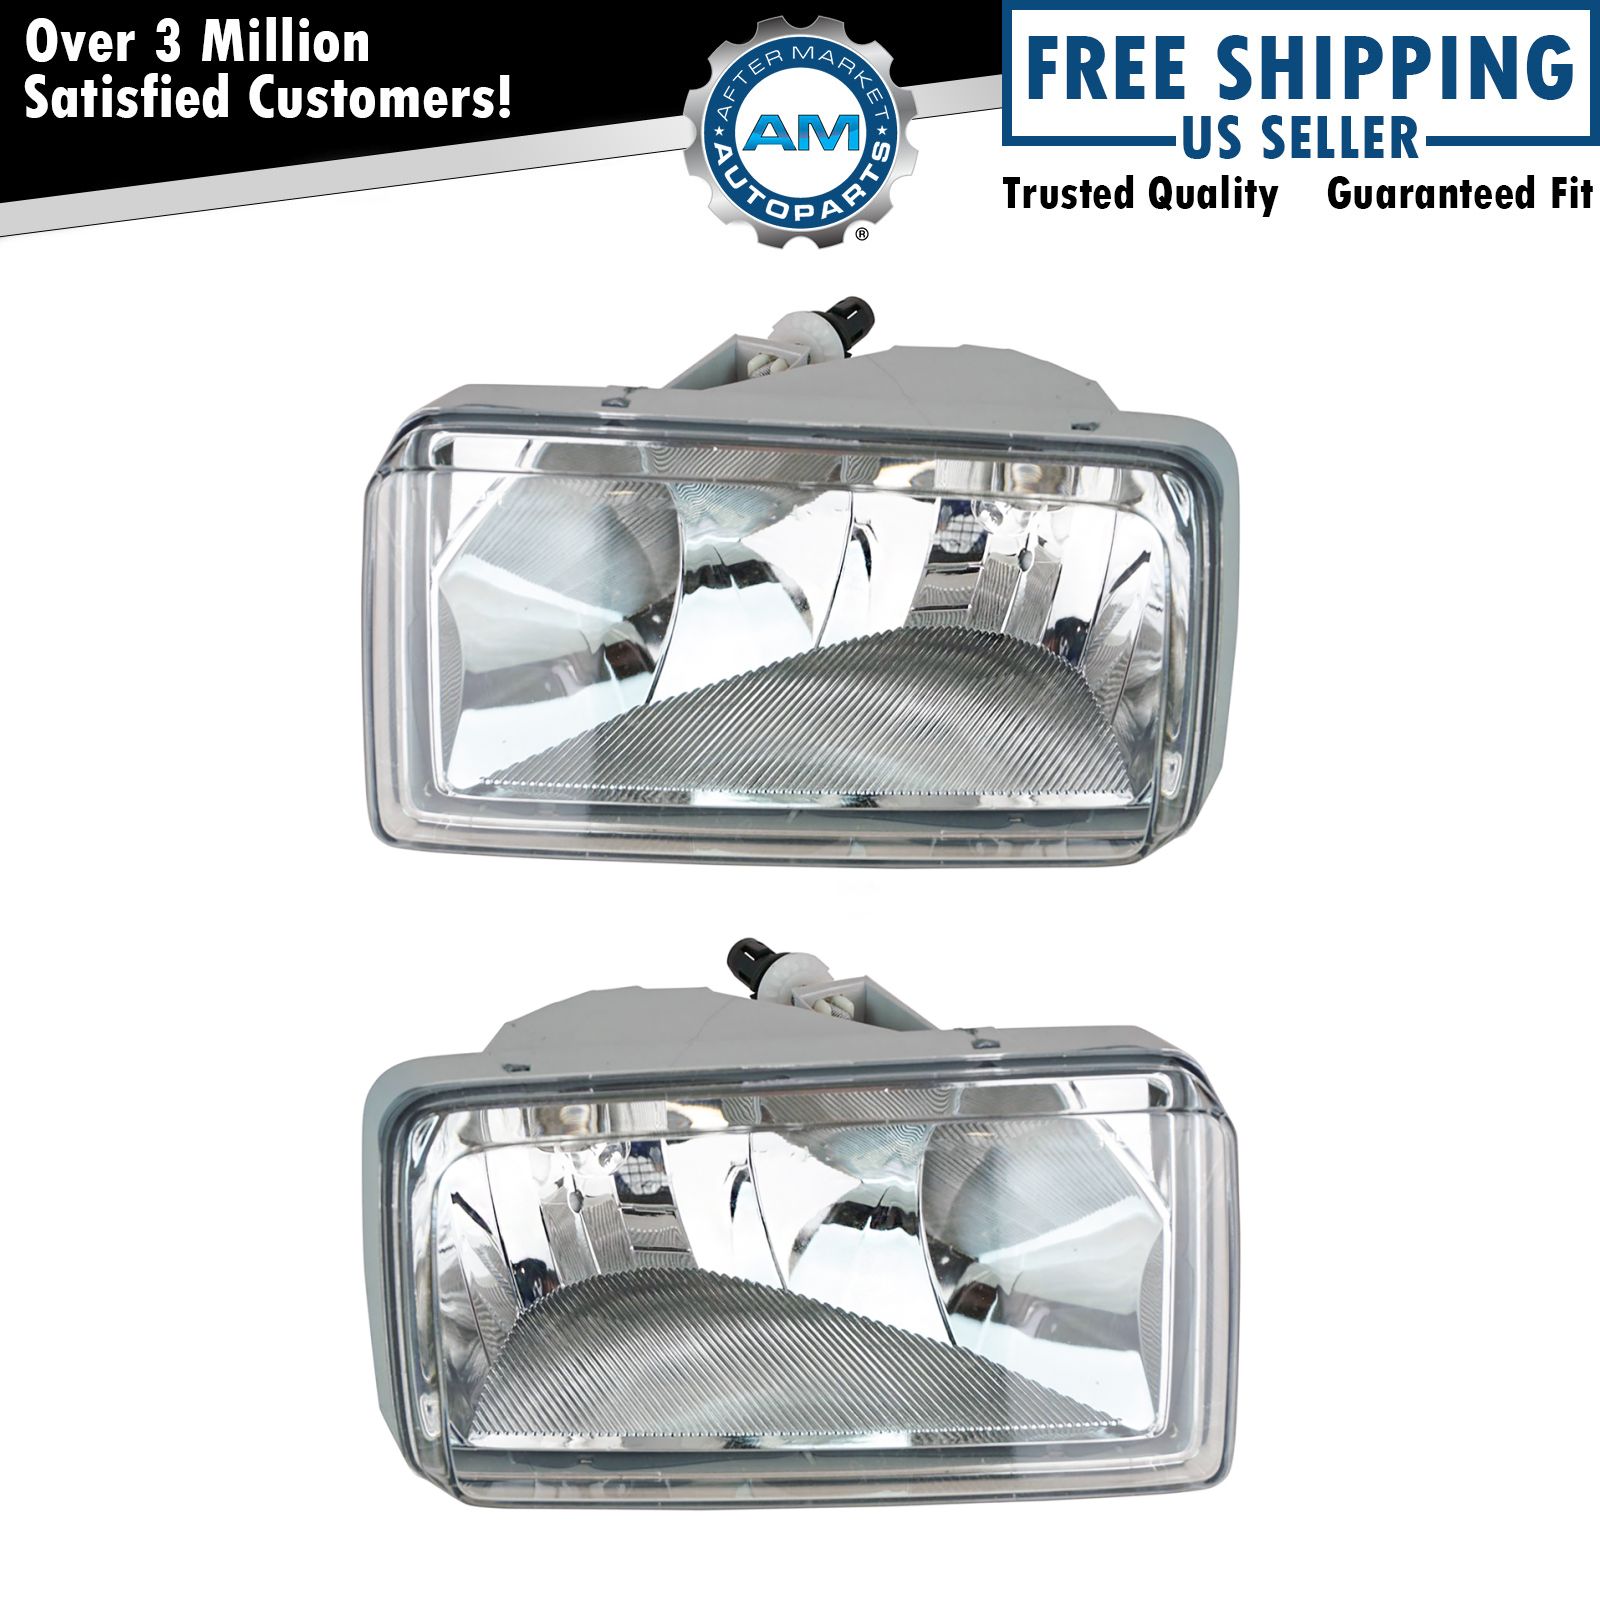 Fog Driving Lights Pair Set for Chevy Silverado Tahoe Avalanche SUV Pickup Truck